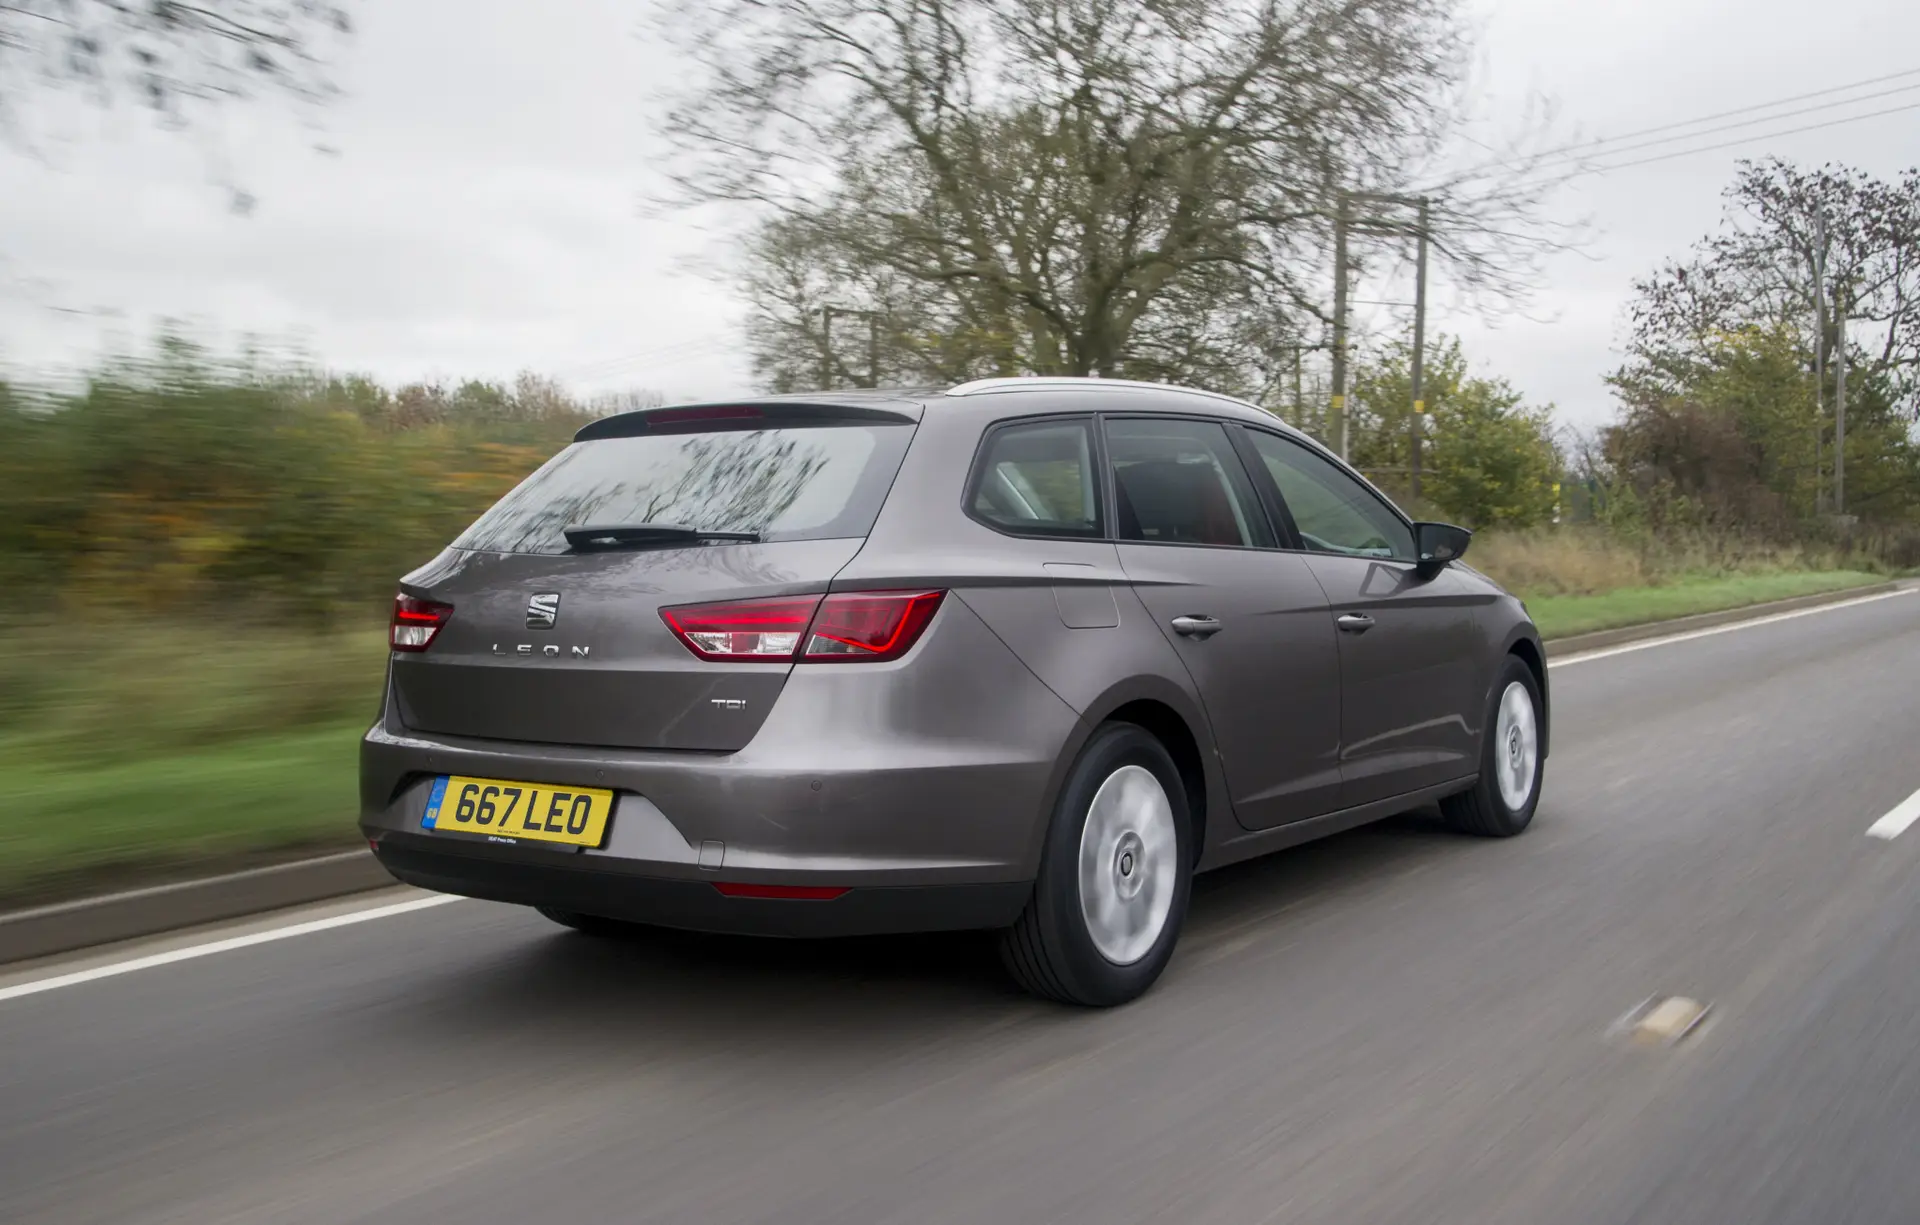 SEAT Leon ST (2014-2020) Review: exterior rear three quarter photo of the SEAT Leon ST on the road